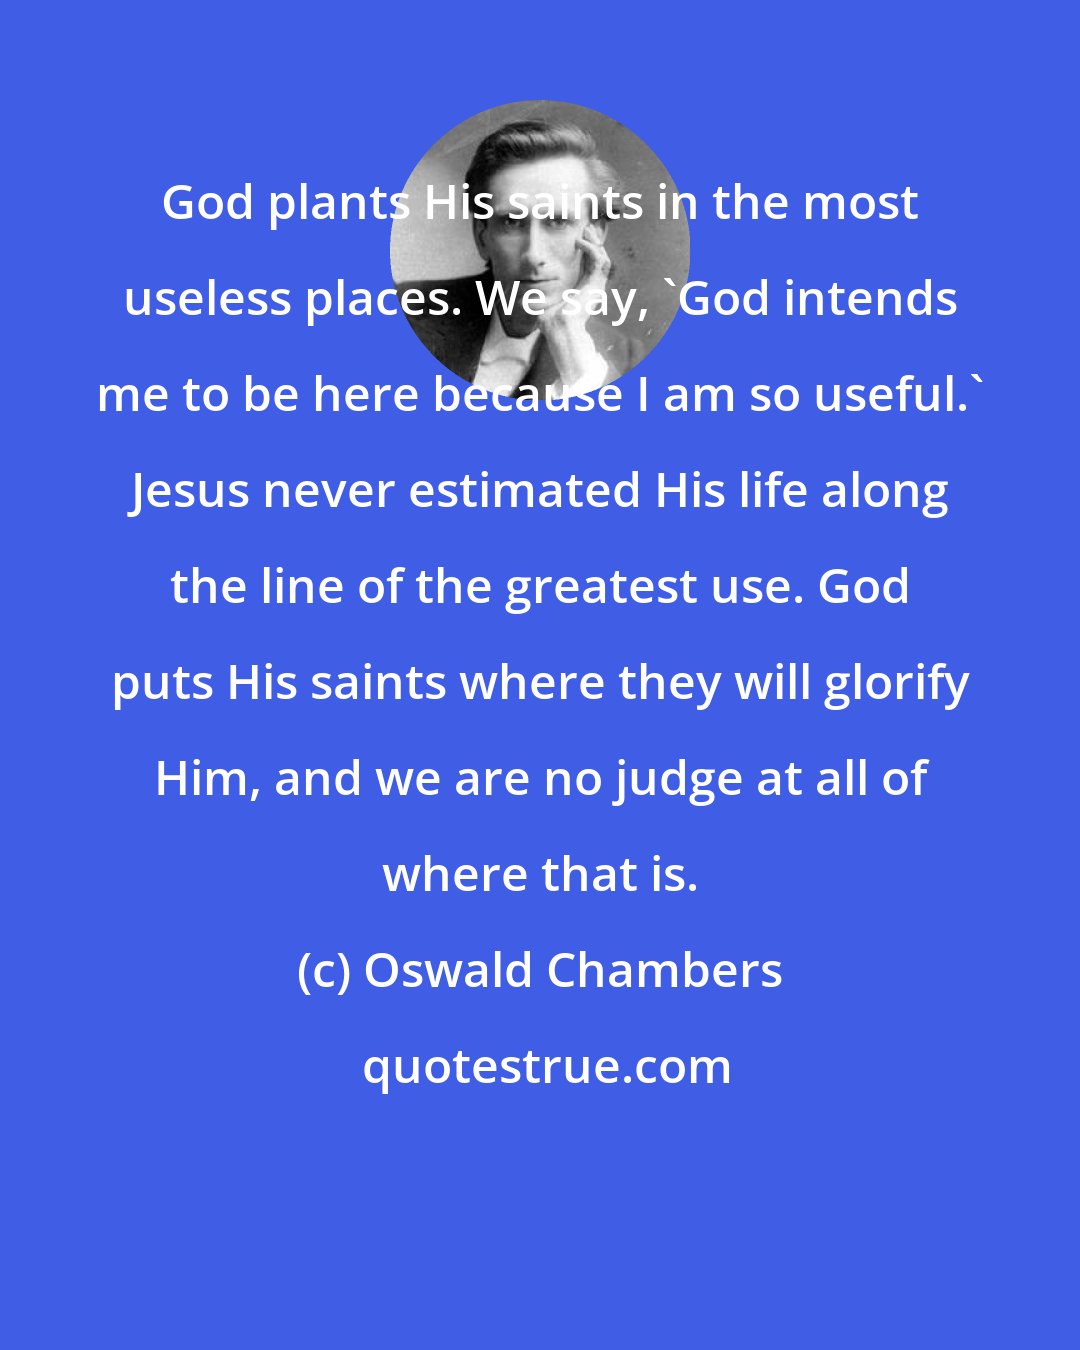 Oswald Chambers: God plants His saints in the most useless places. We say, 'God intends me to be here because I am so useful.' Jesus never estimated His life along the line of the greatest use. God puts His saints where they will glorify Him, and we are no judge at all of where that is.